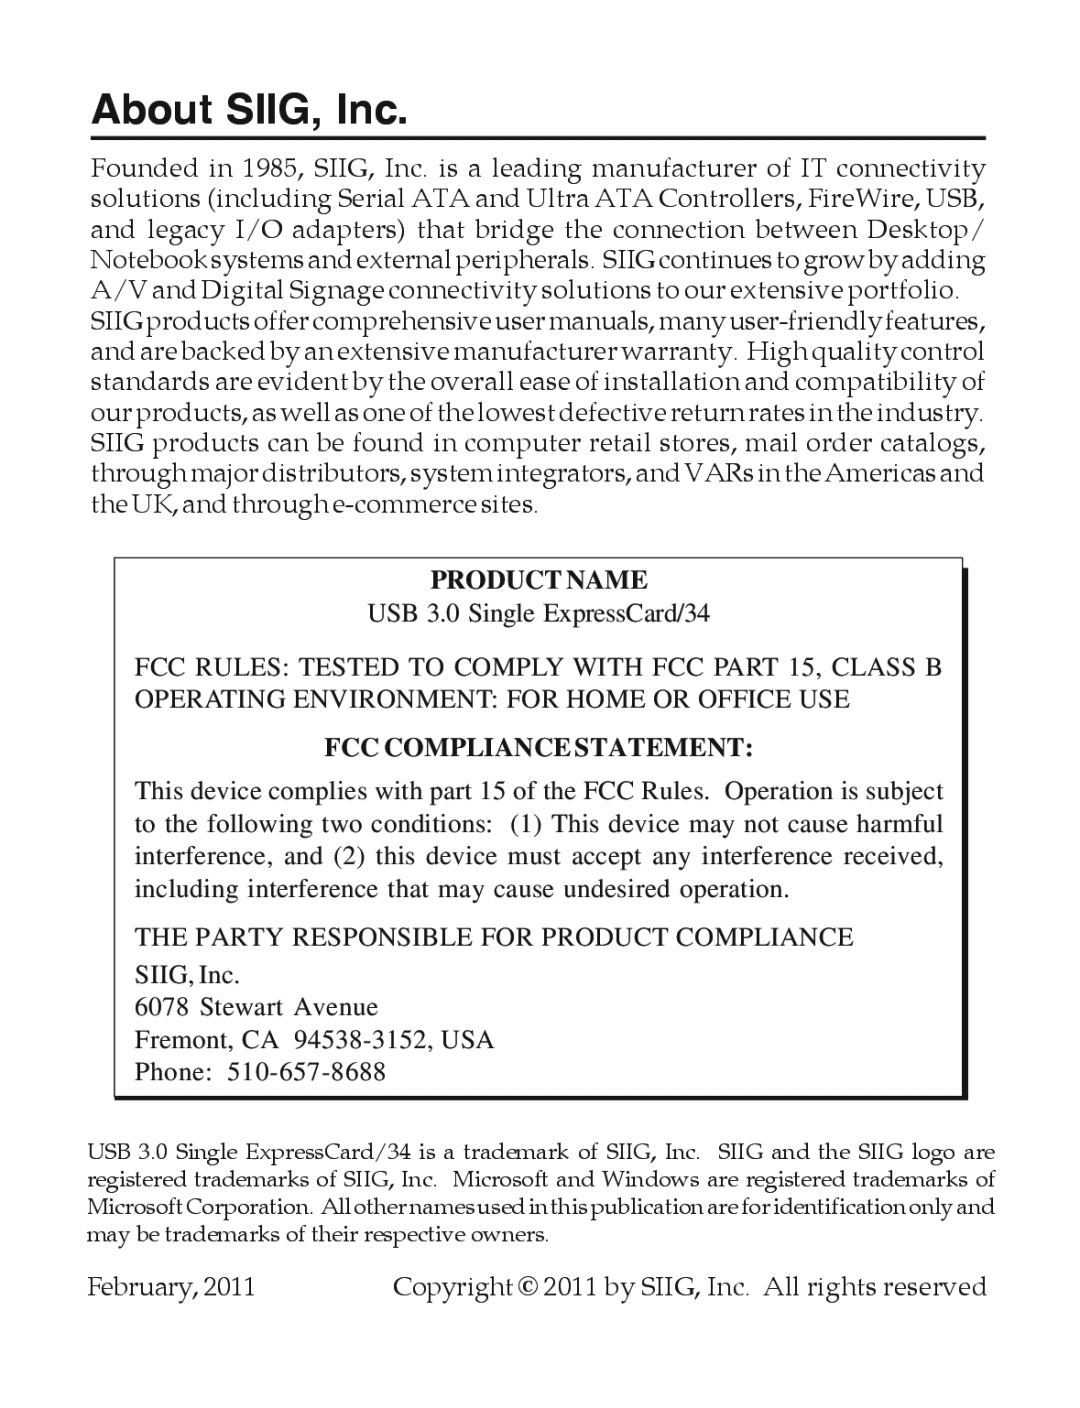 SIIG 5052, 5053 manual About SIIG, Inc, Product Name, Fcc Compliance Statement 